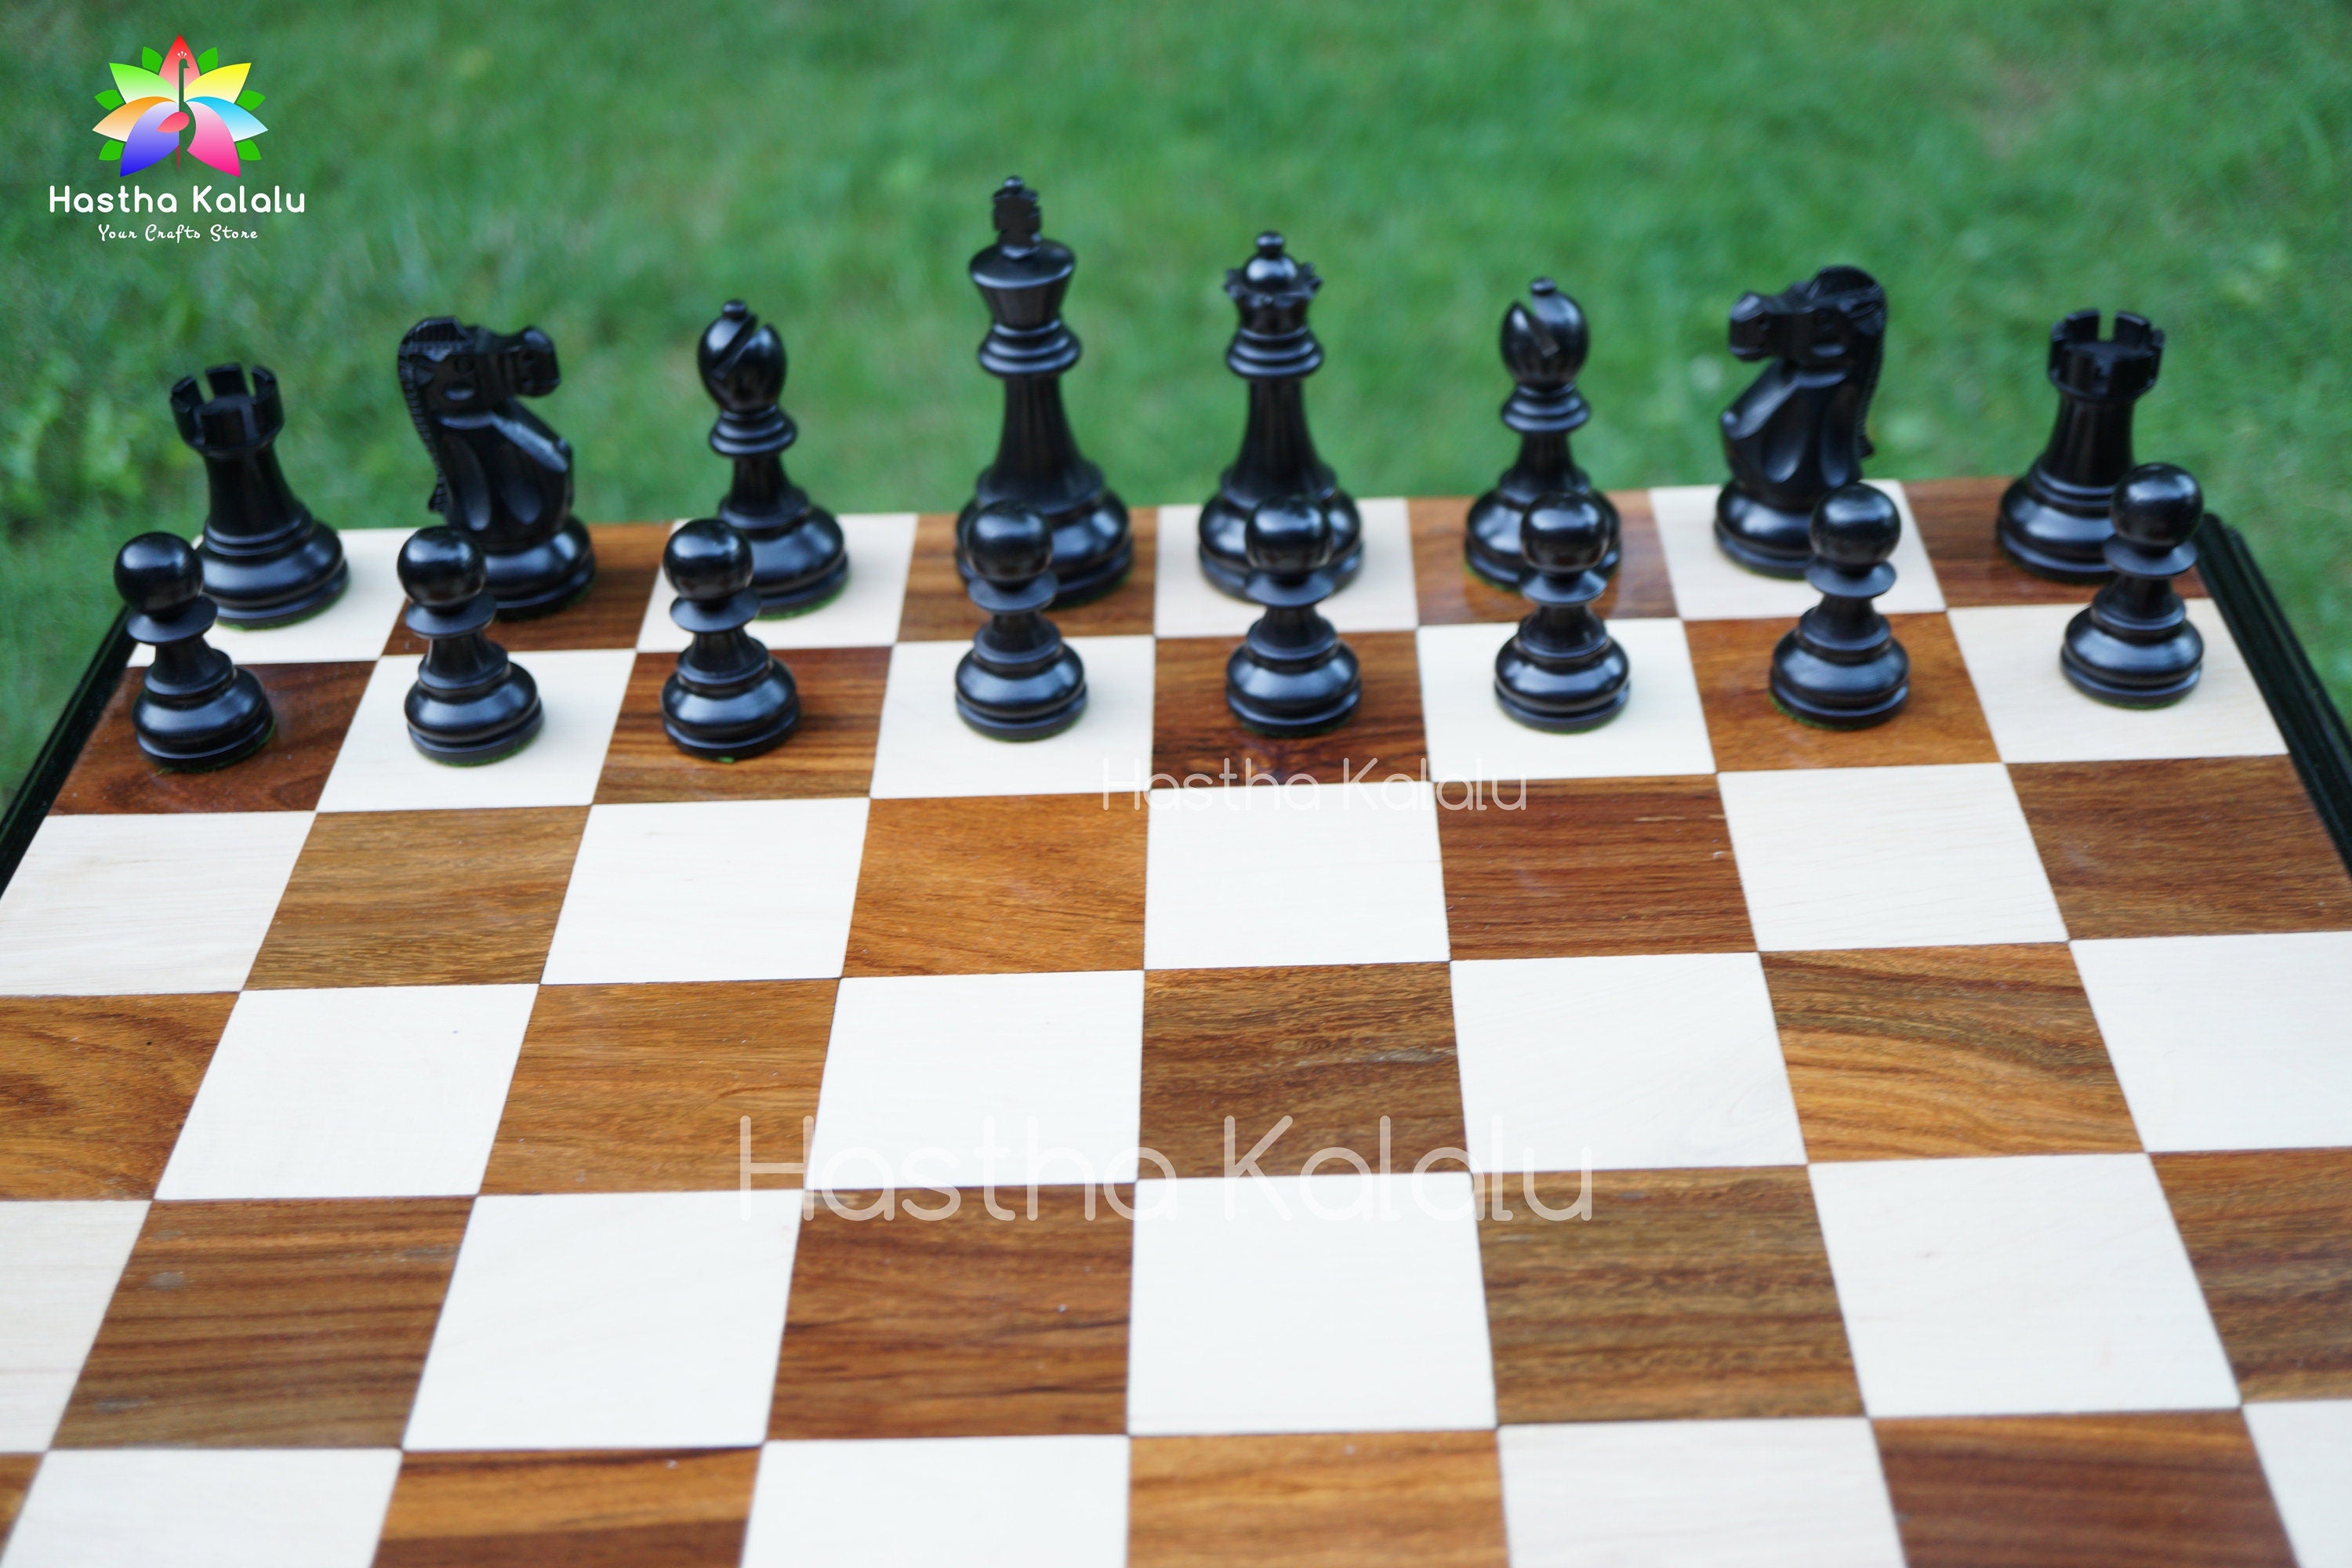 Classic Staunton Tournament Series, Weighted Chess Pieces, 4" King with 21" Sheesham and Maple Chess Board